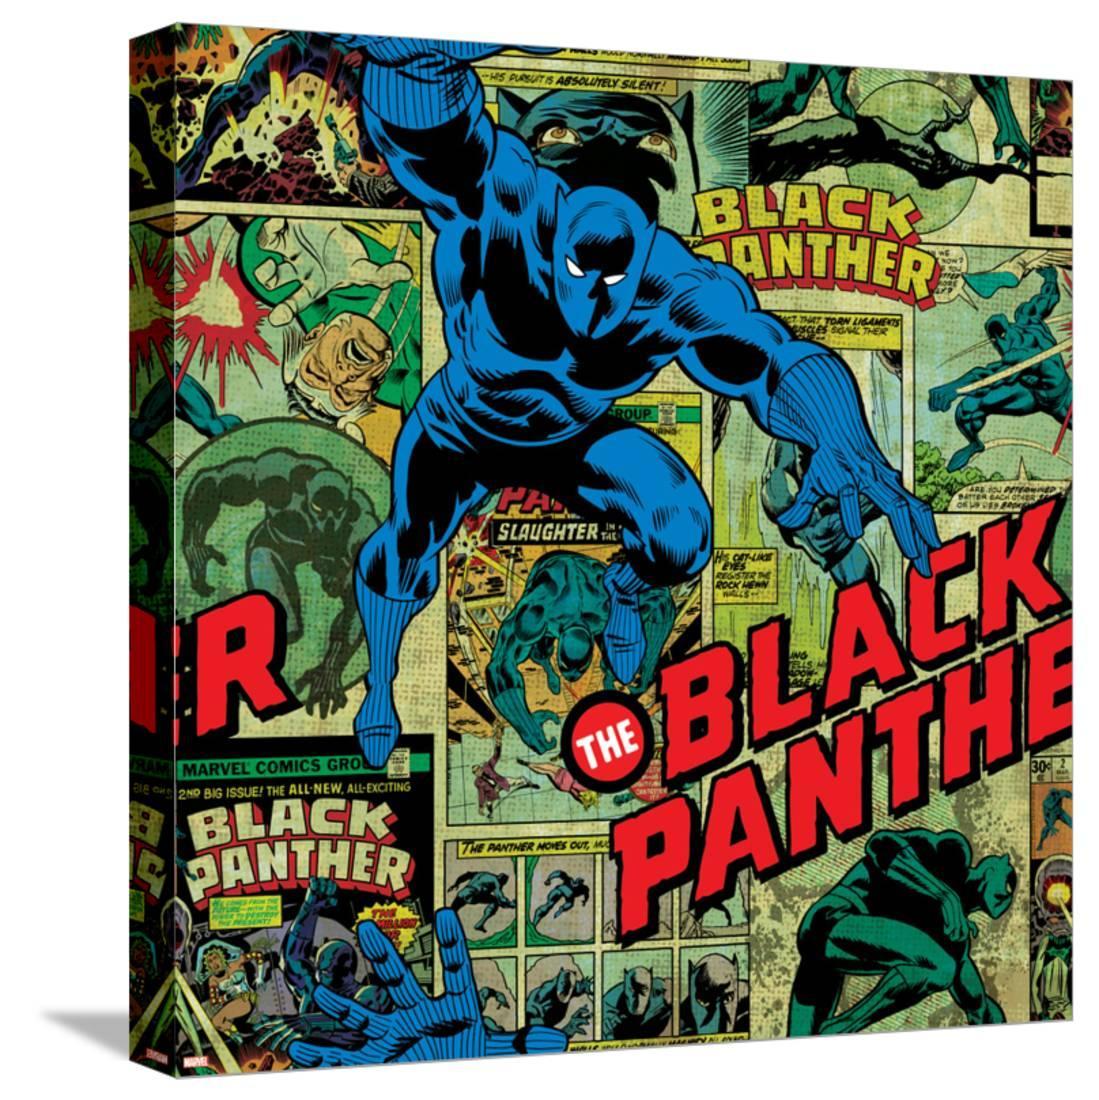 Marvel Comics Retro Pattern Design Featuring Black Panther Stretched Canvas Print Wall Art